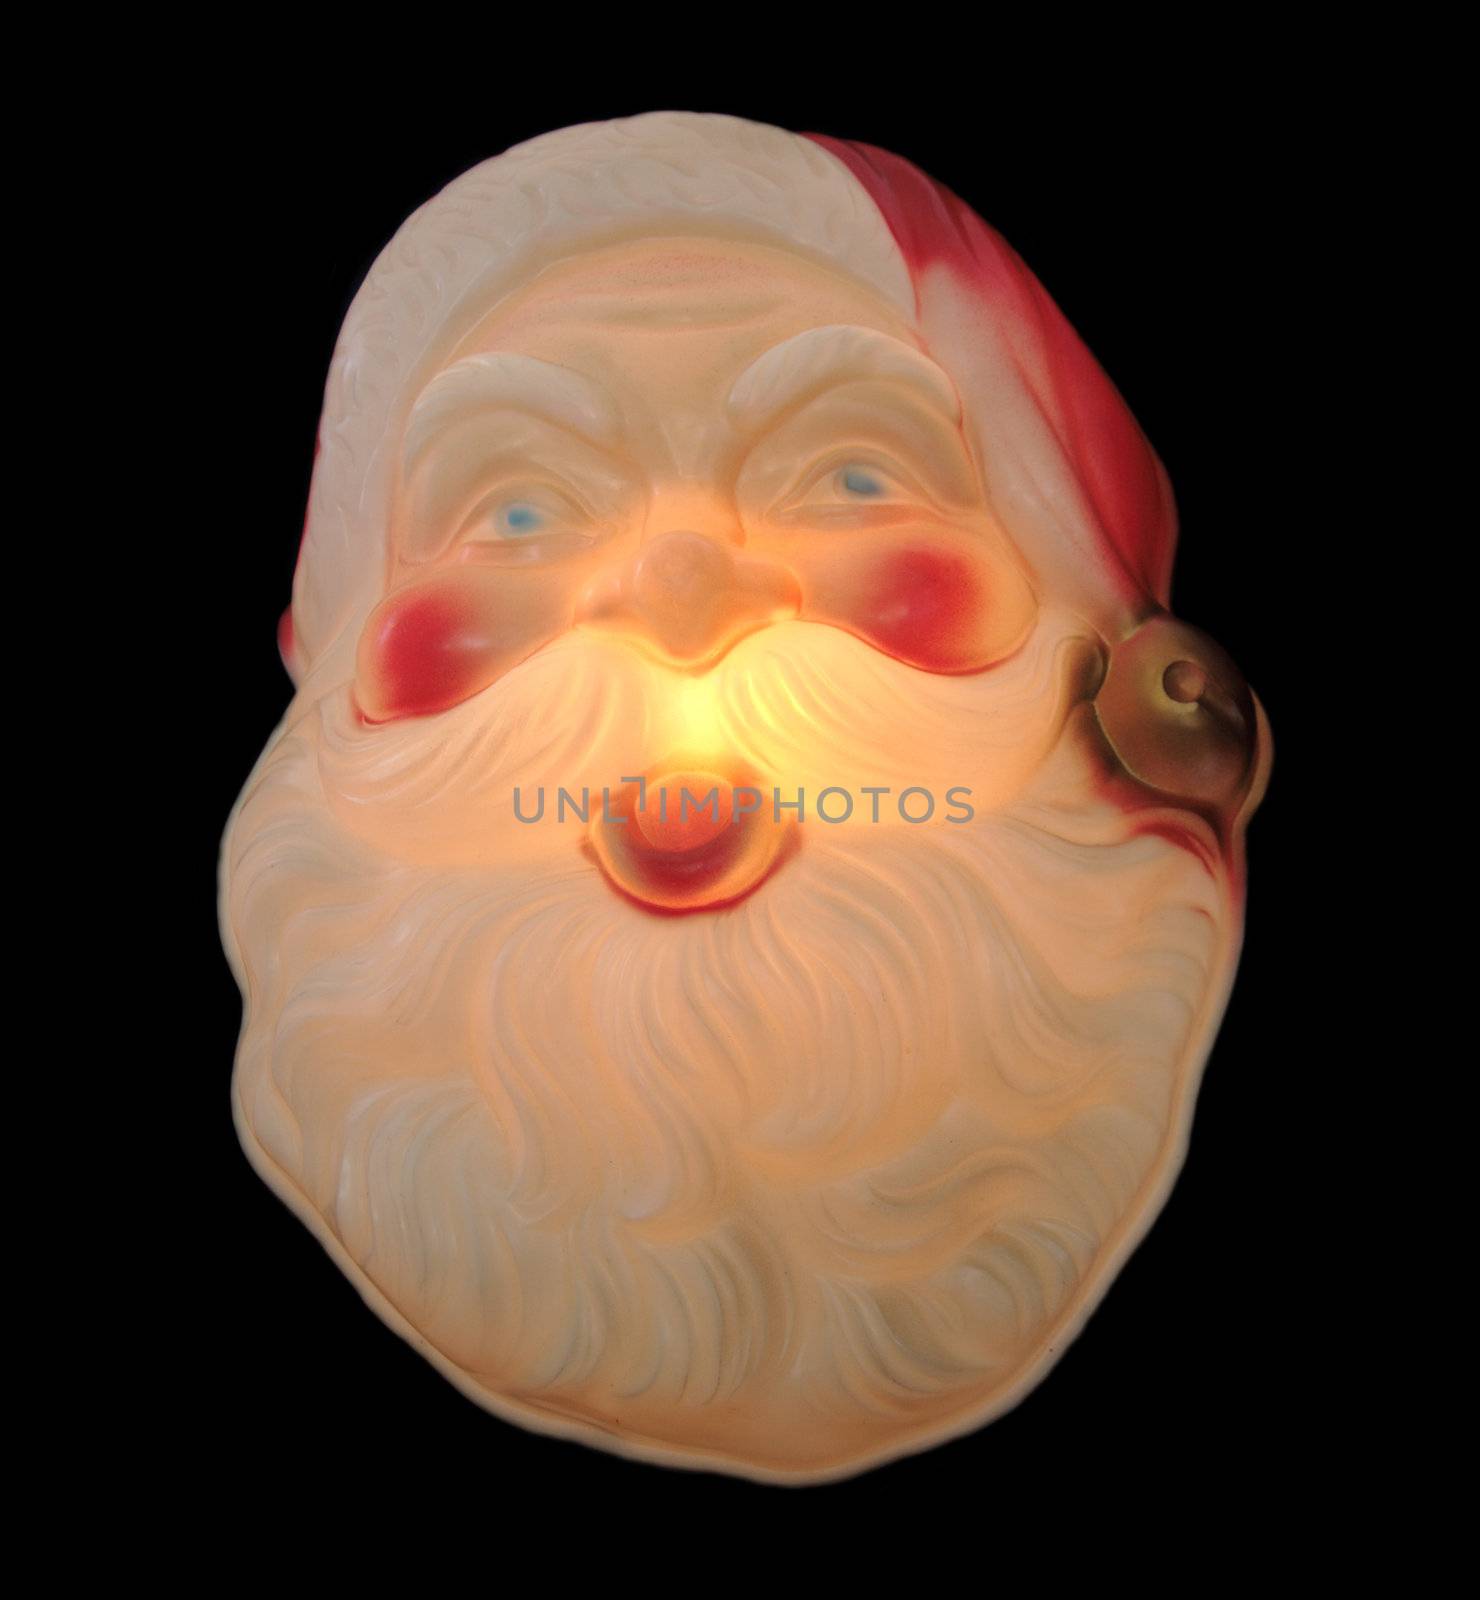 old Santa Claus decoration lit up and isolated on black